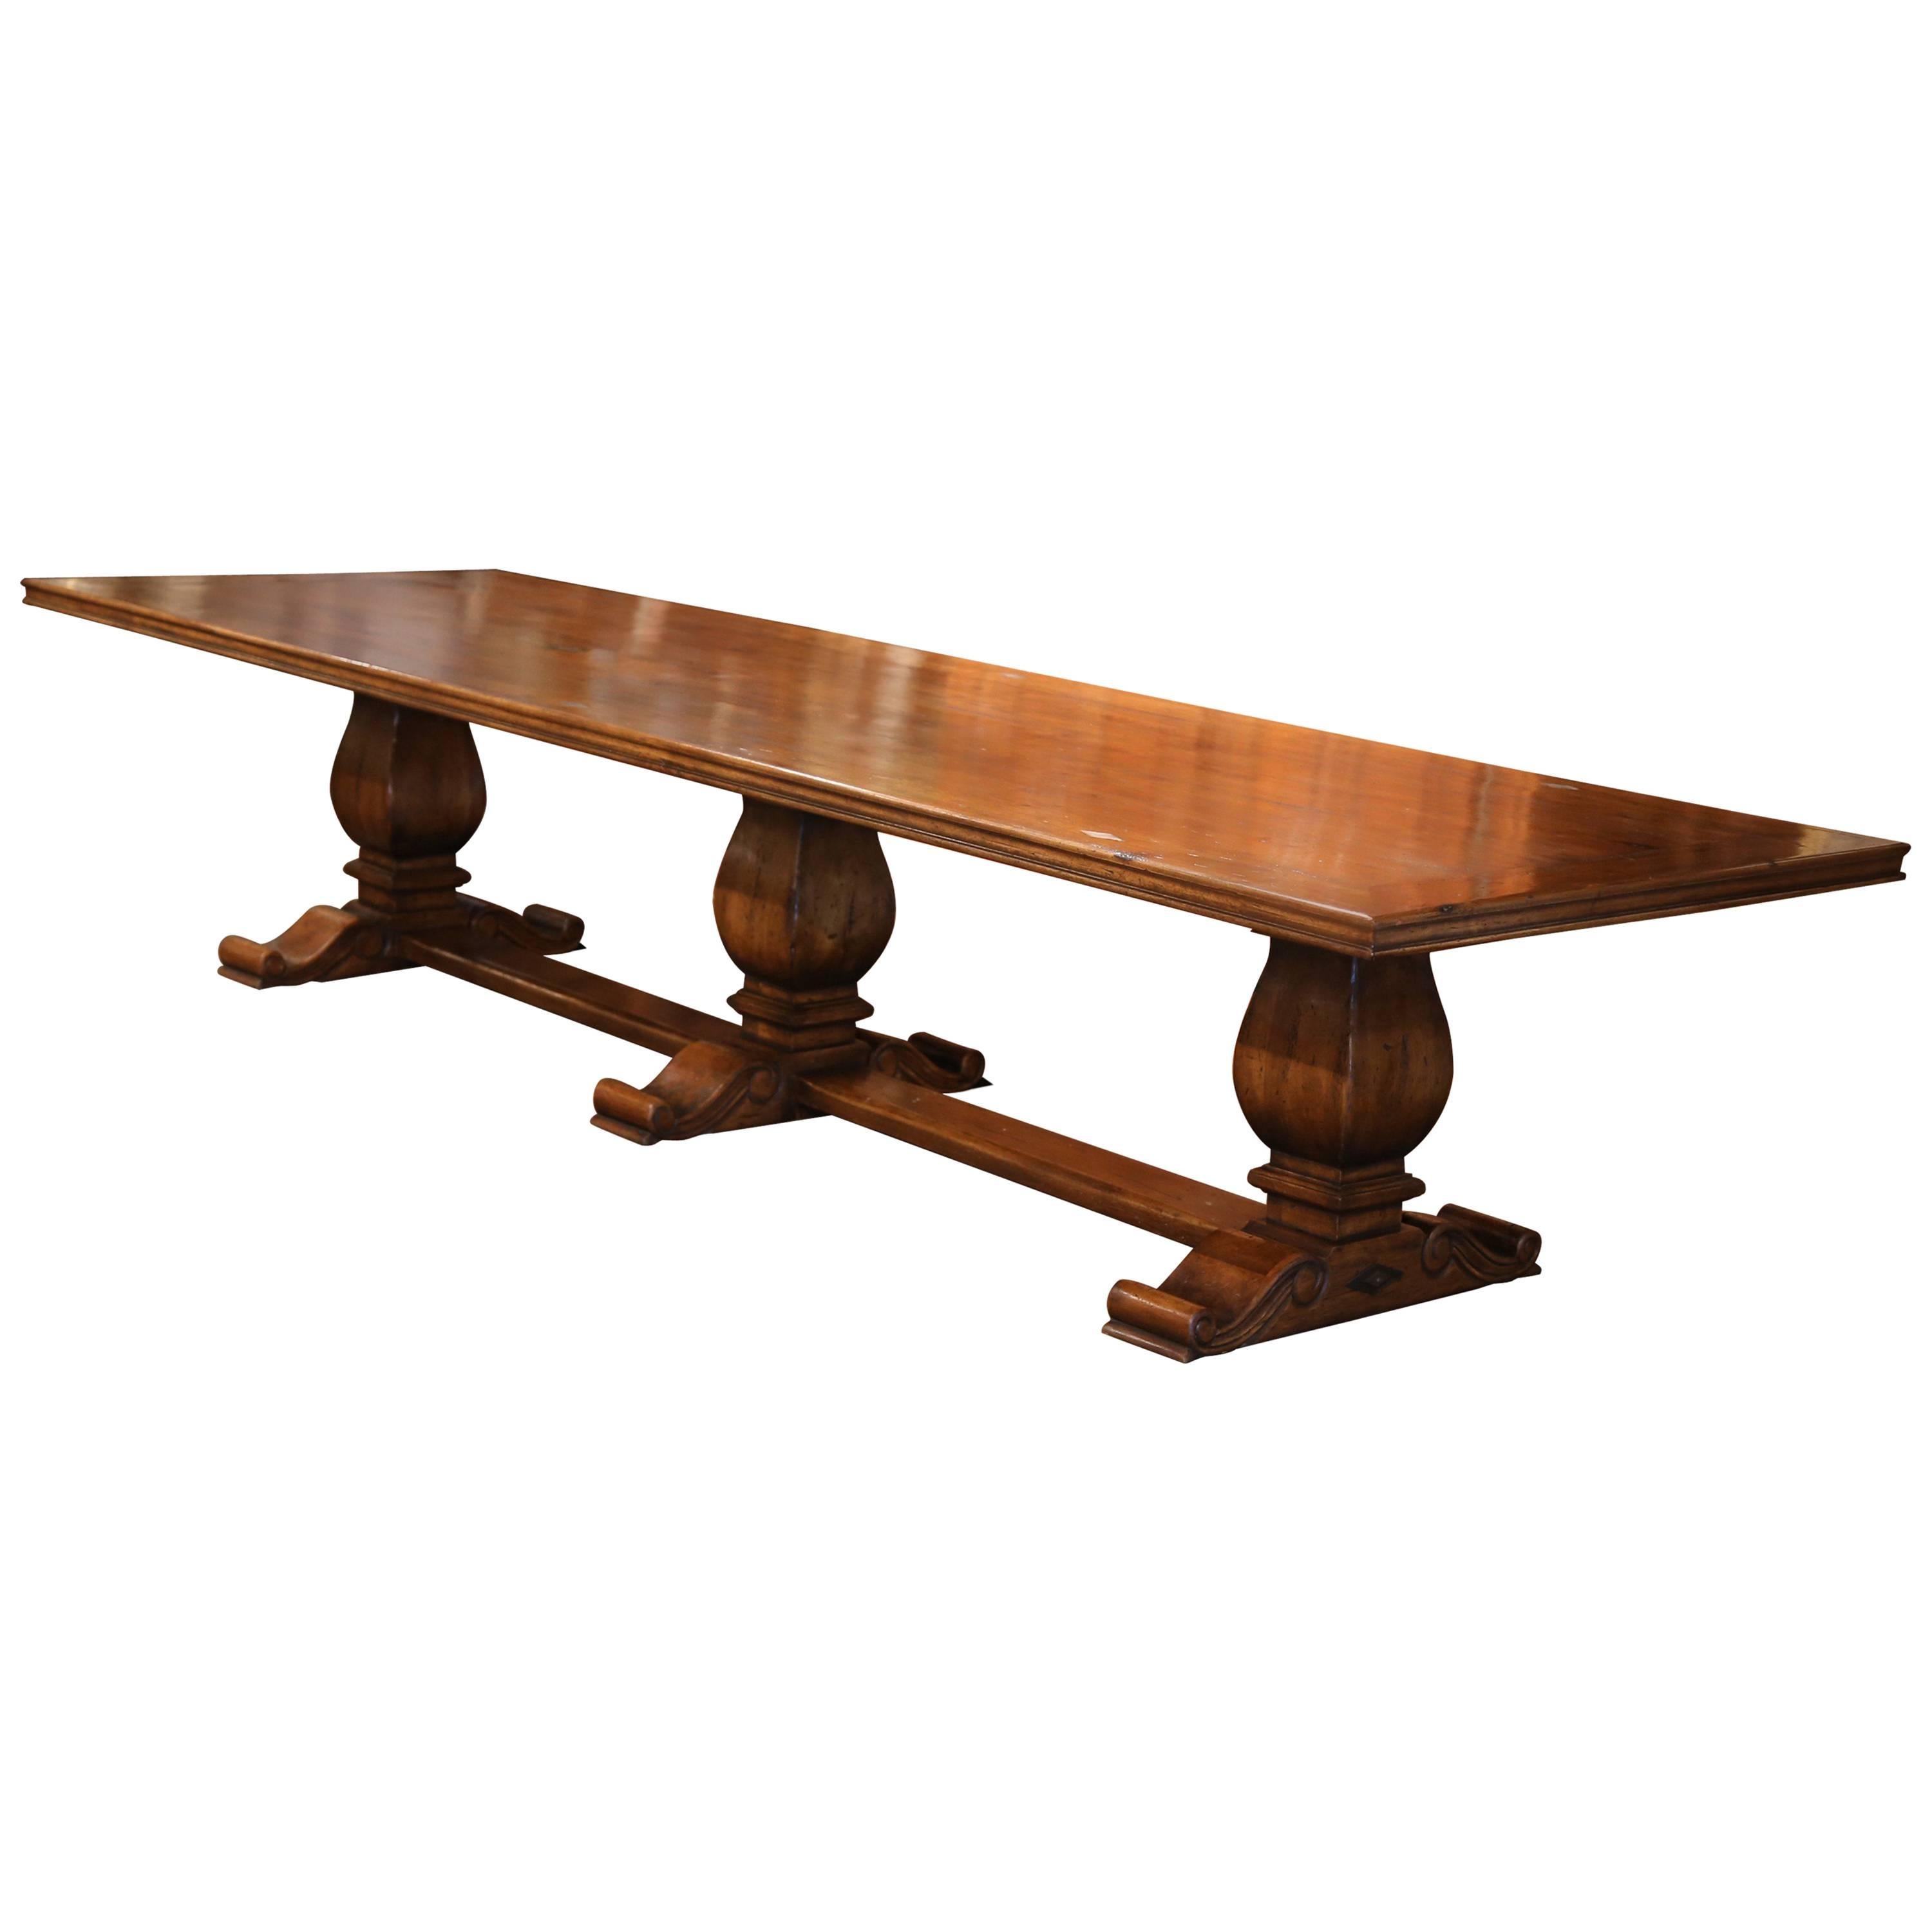 Large French Louis XIII Style Walnut Trestle Farm Table with Three Carved Legs